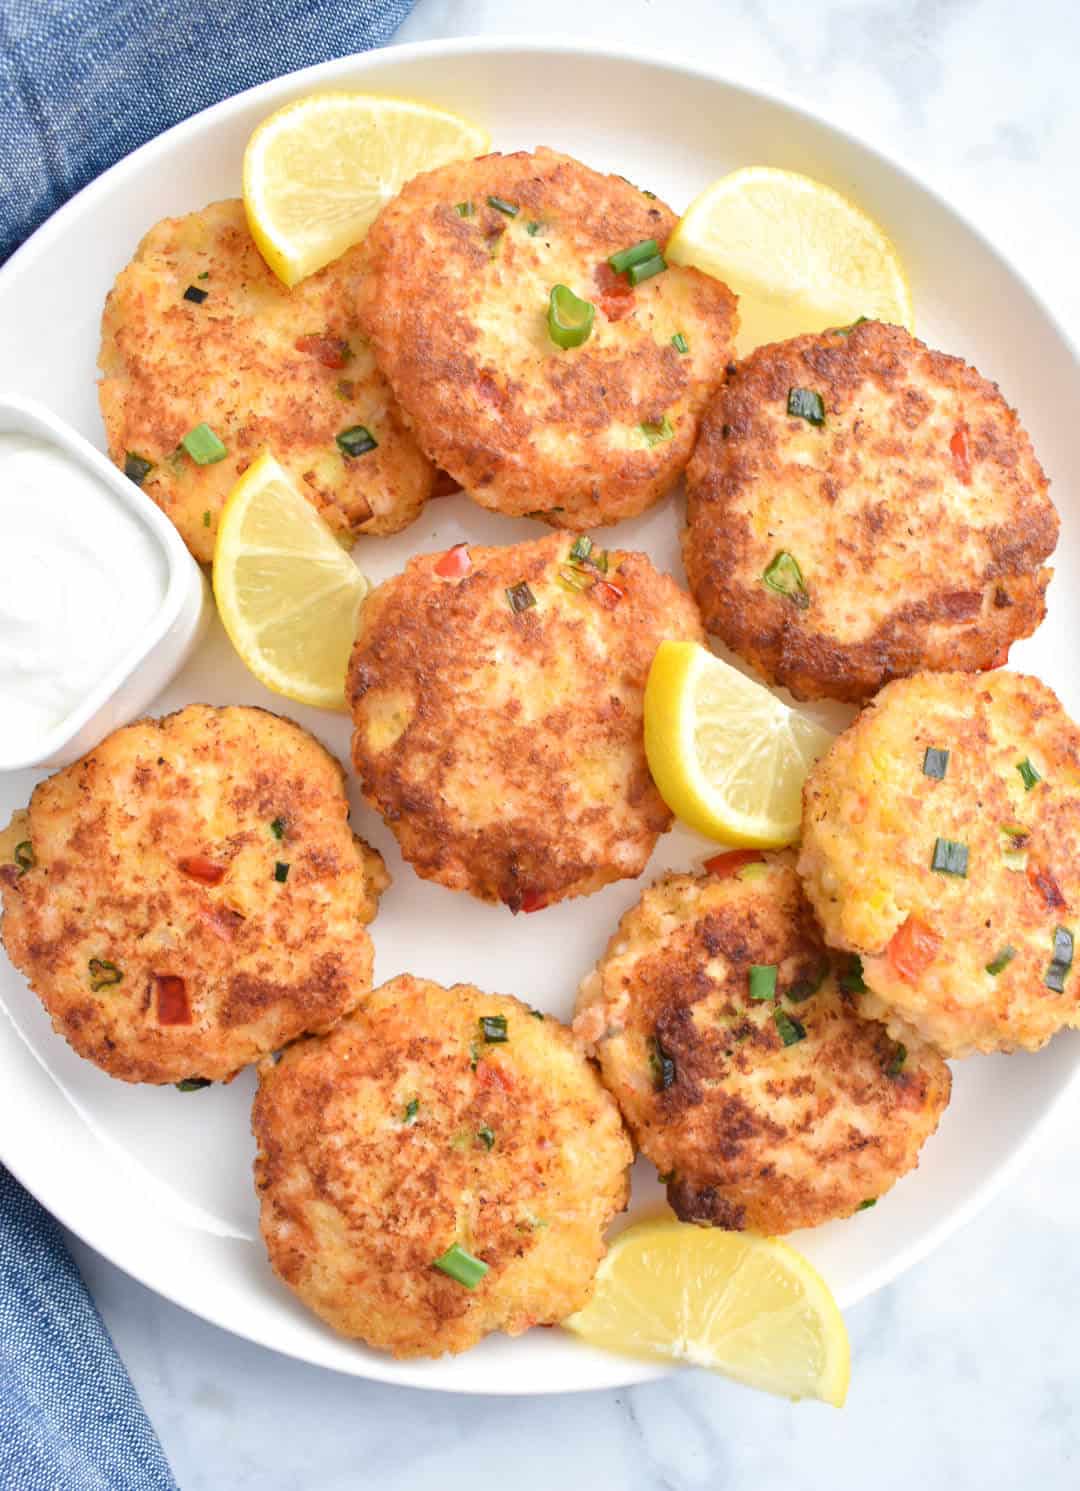 Plate of Easy Shrimp Cakes with lemon wedges.
